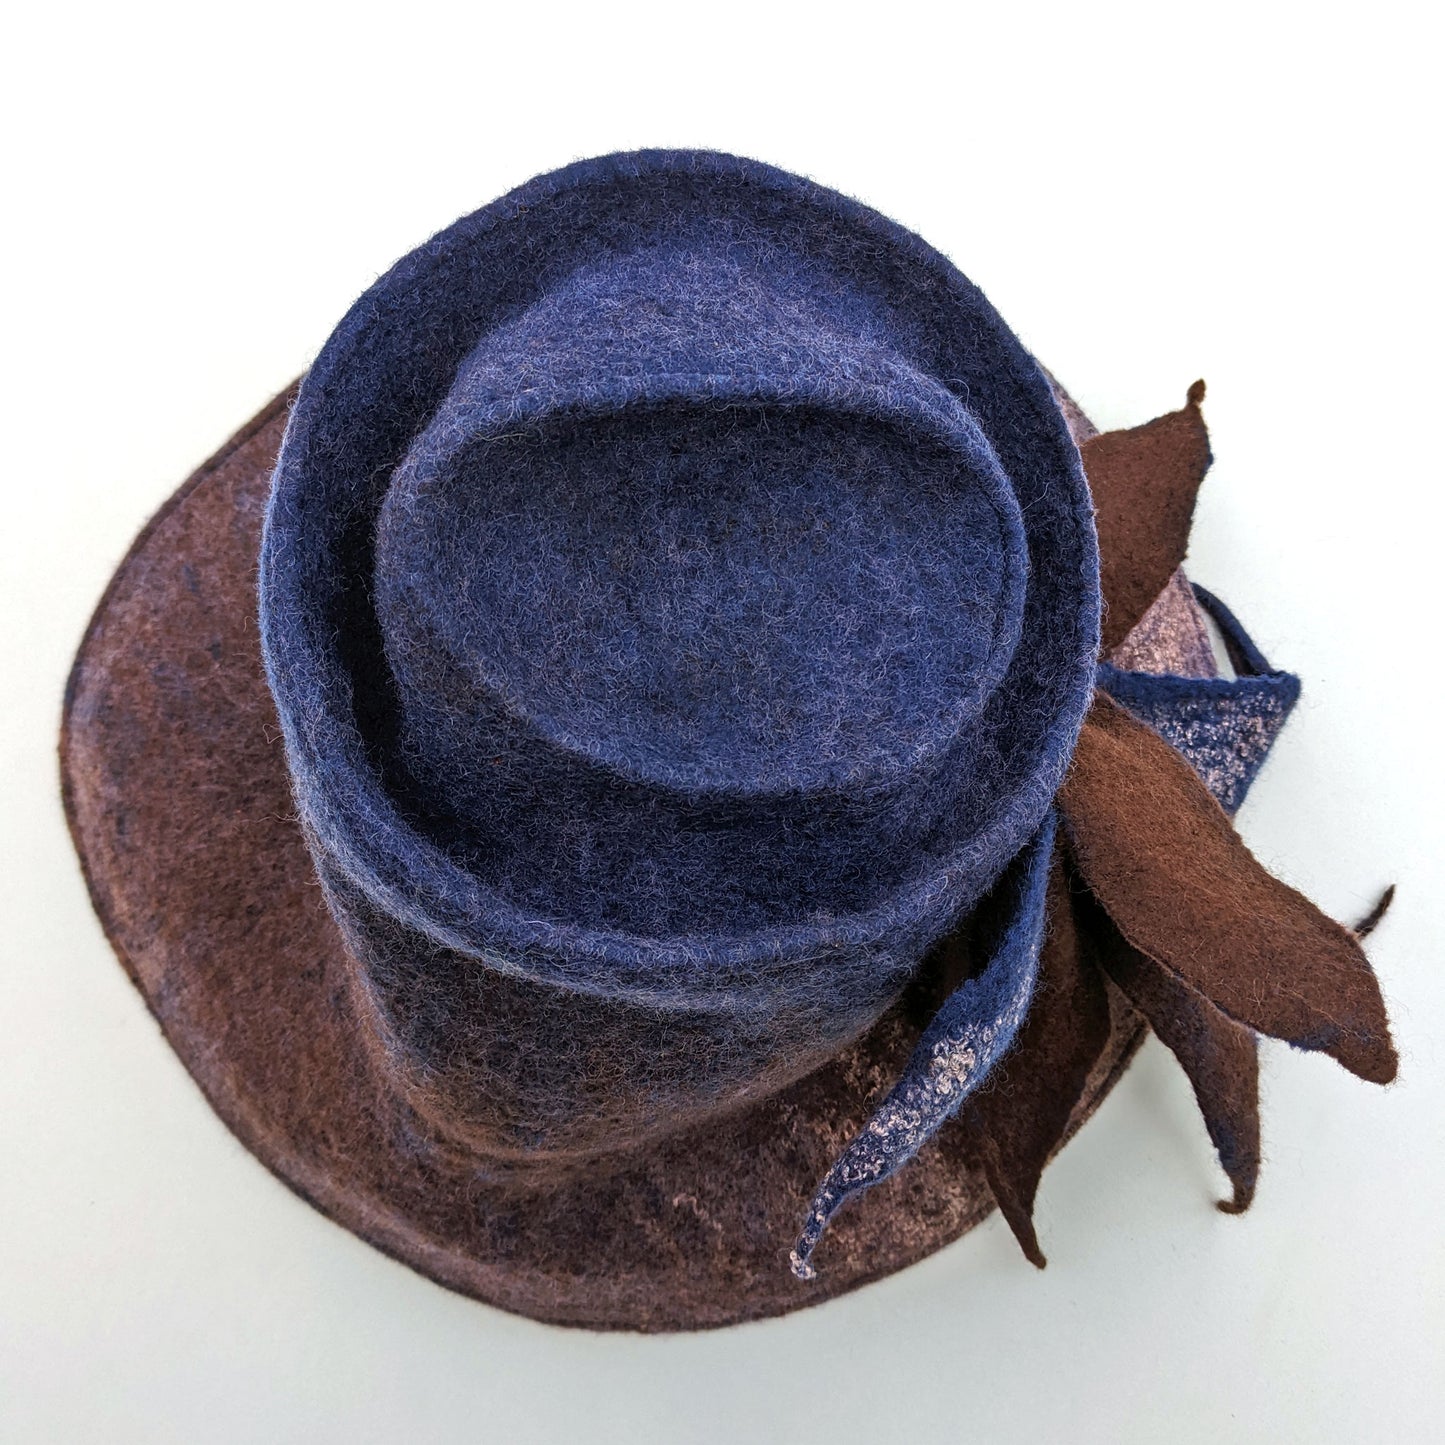 Asymmetrical Brimmed Felt Hat in an Ombre of Navy Brown - topview